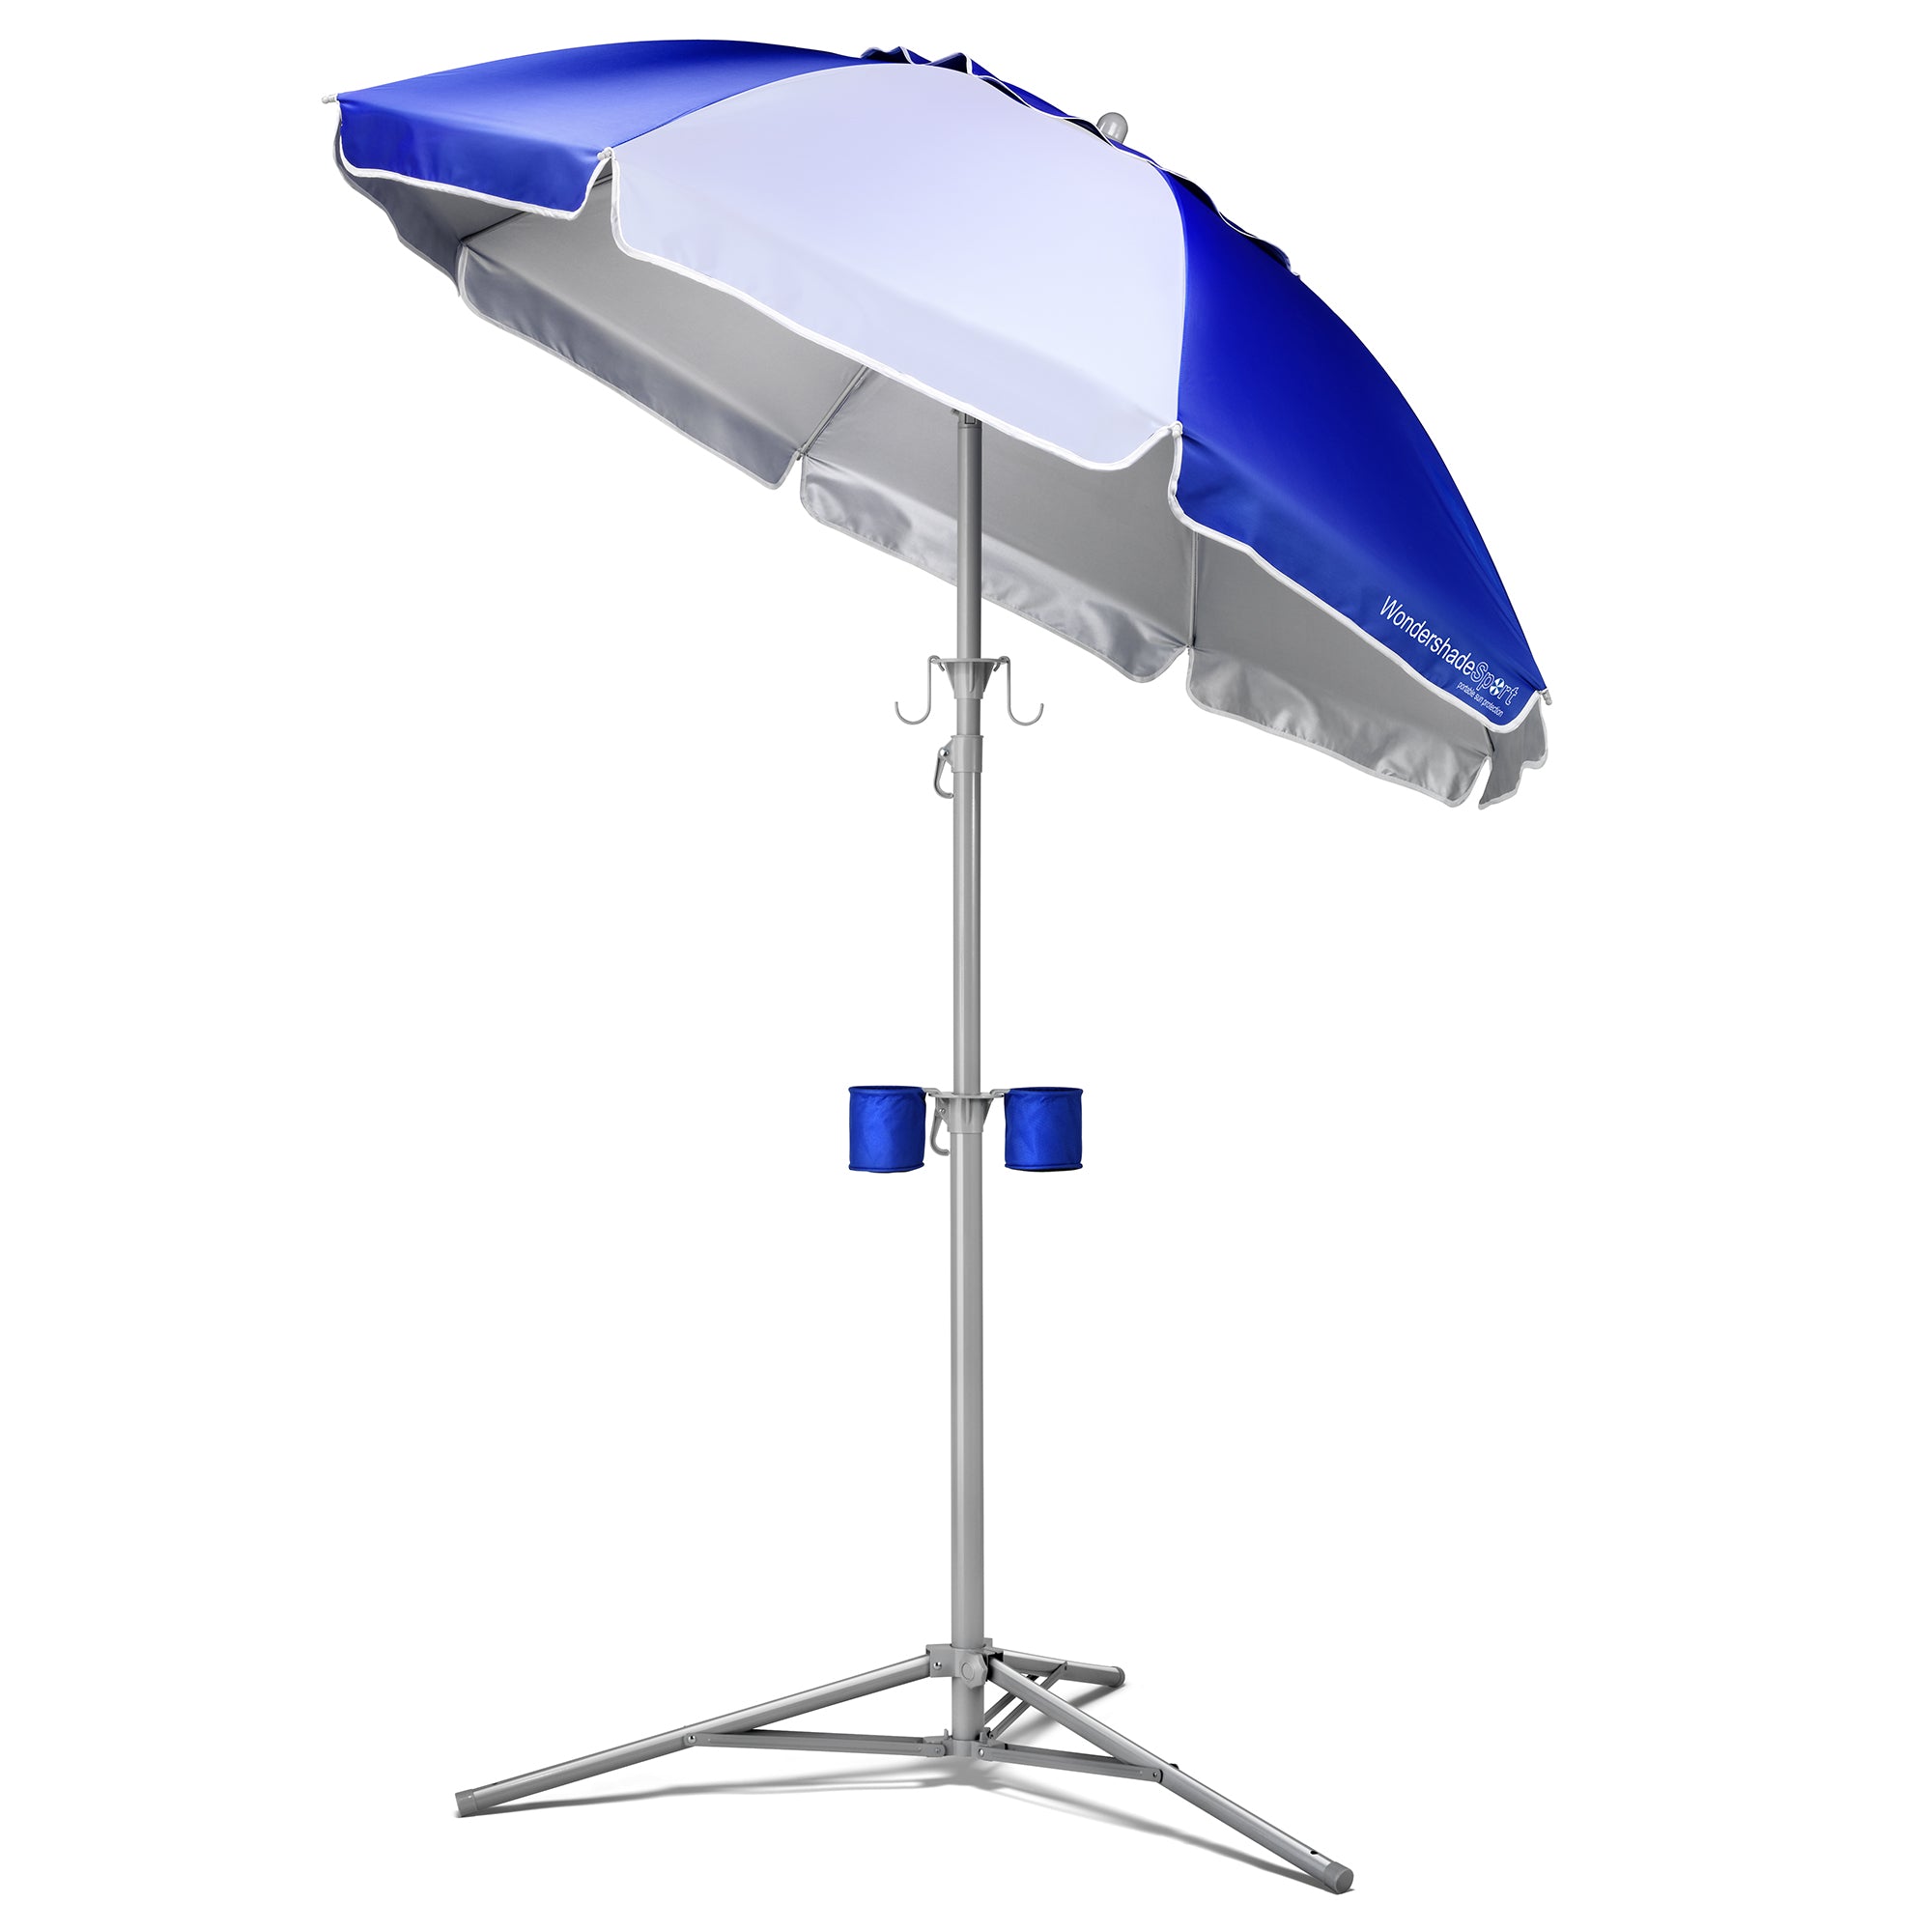 Wondershade Portable Sun Shade blue/white, with cupholders